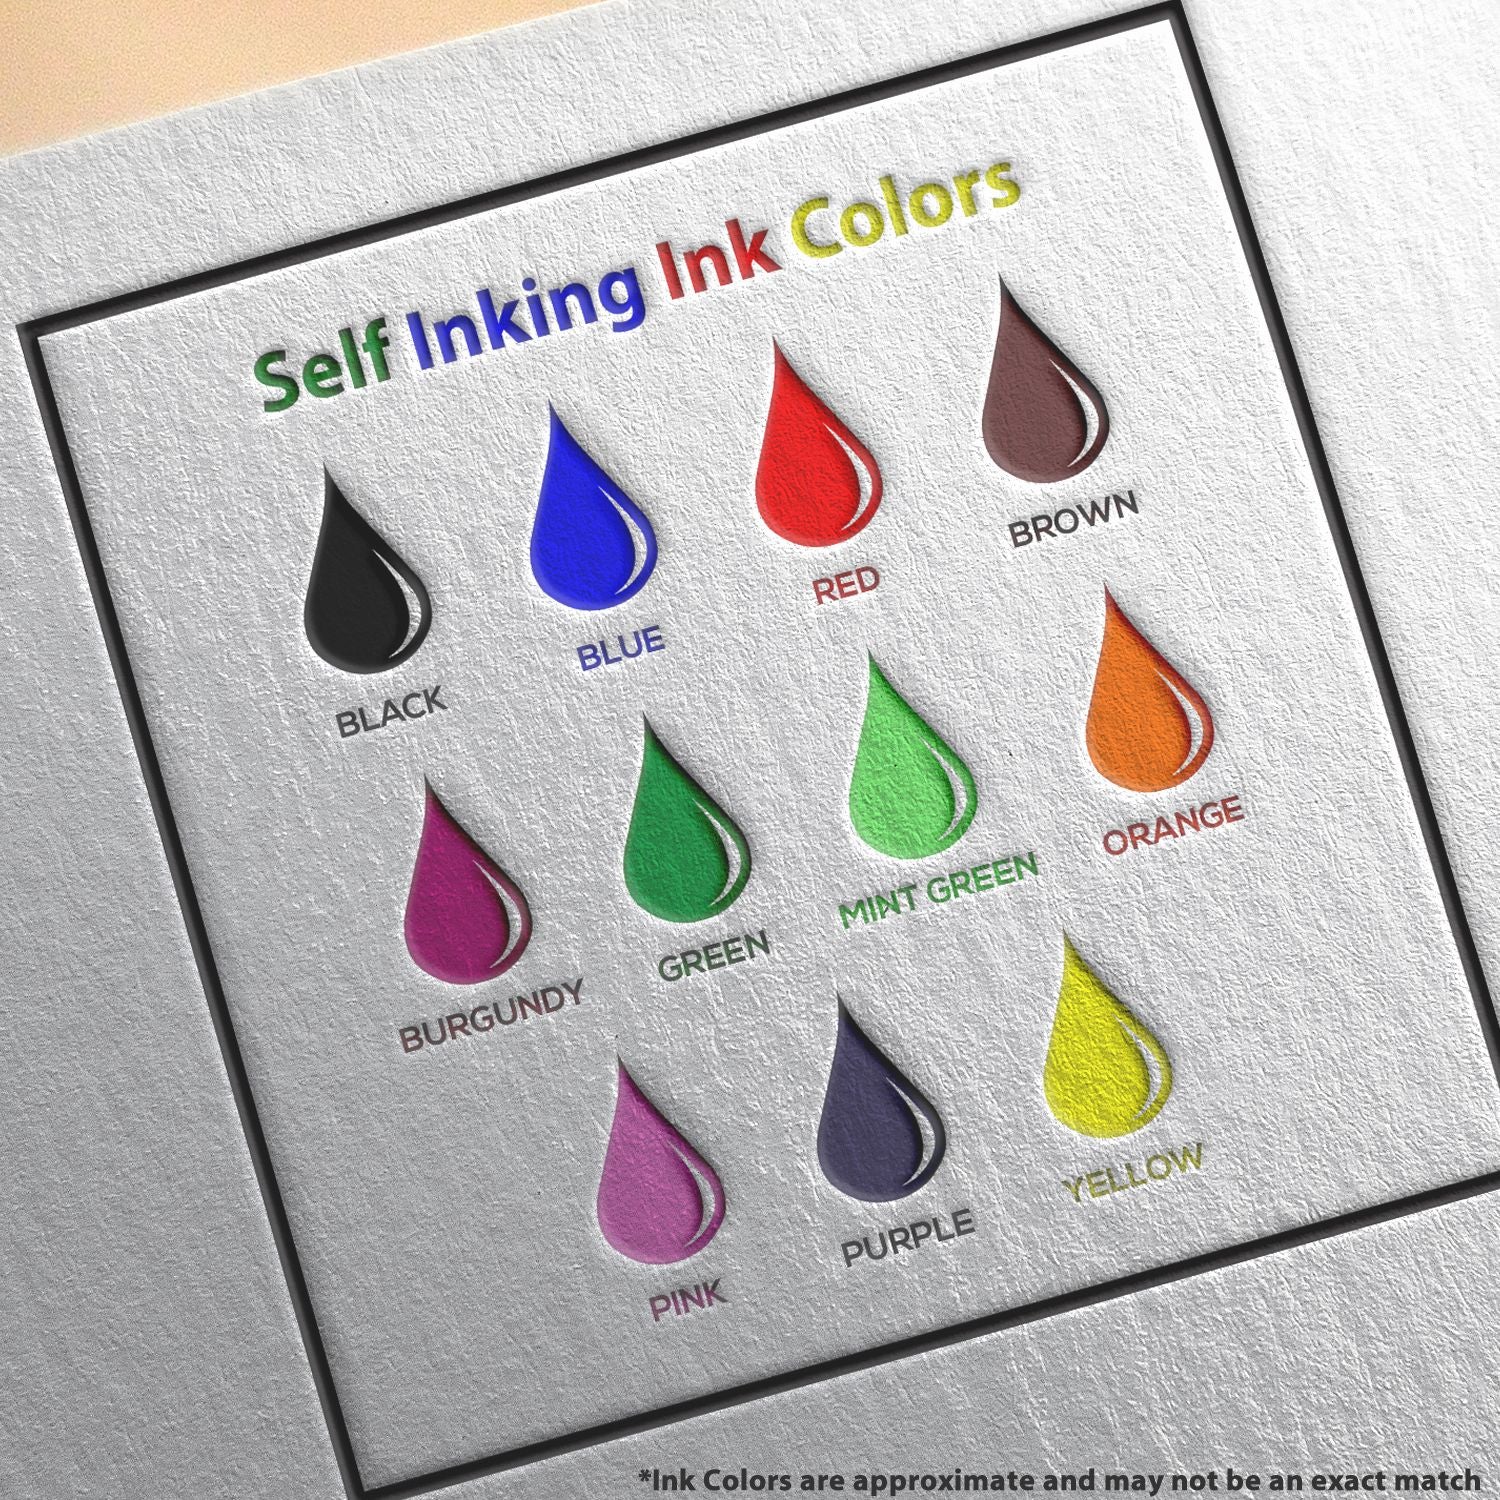 A picture showing the different ink colors or hues available for the Self-Inking Nevada PE Stamp product.